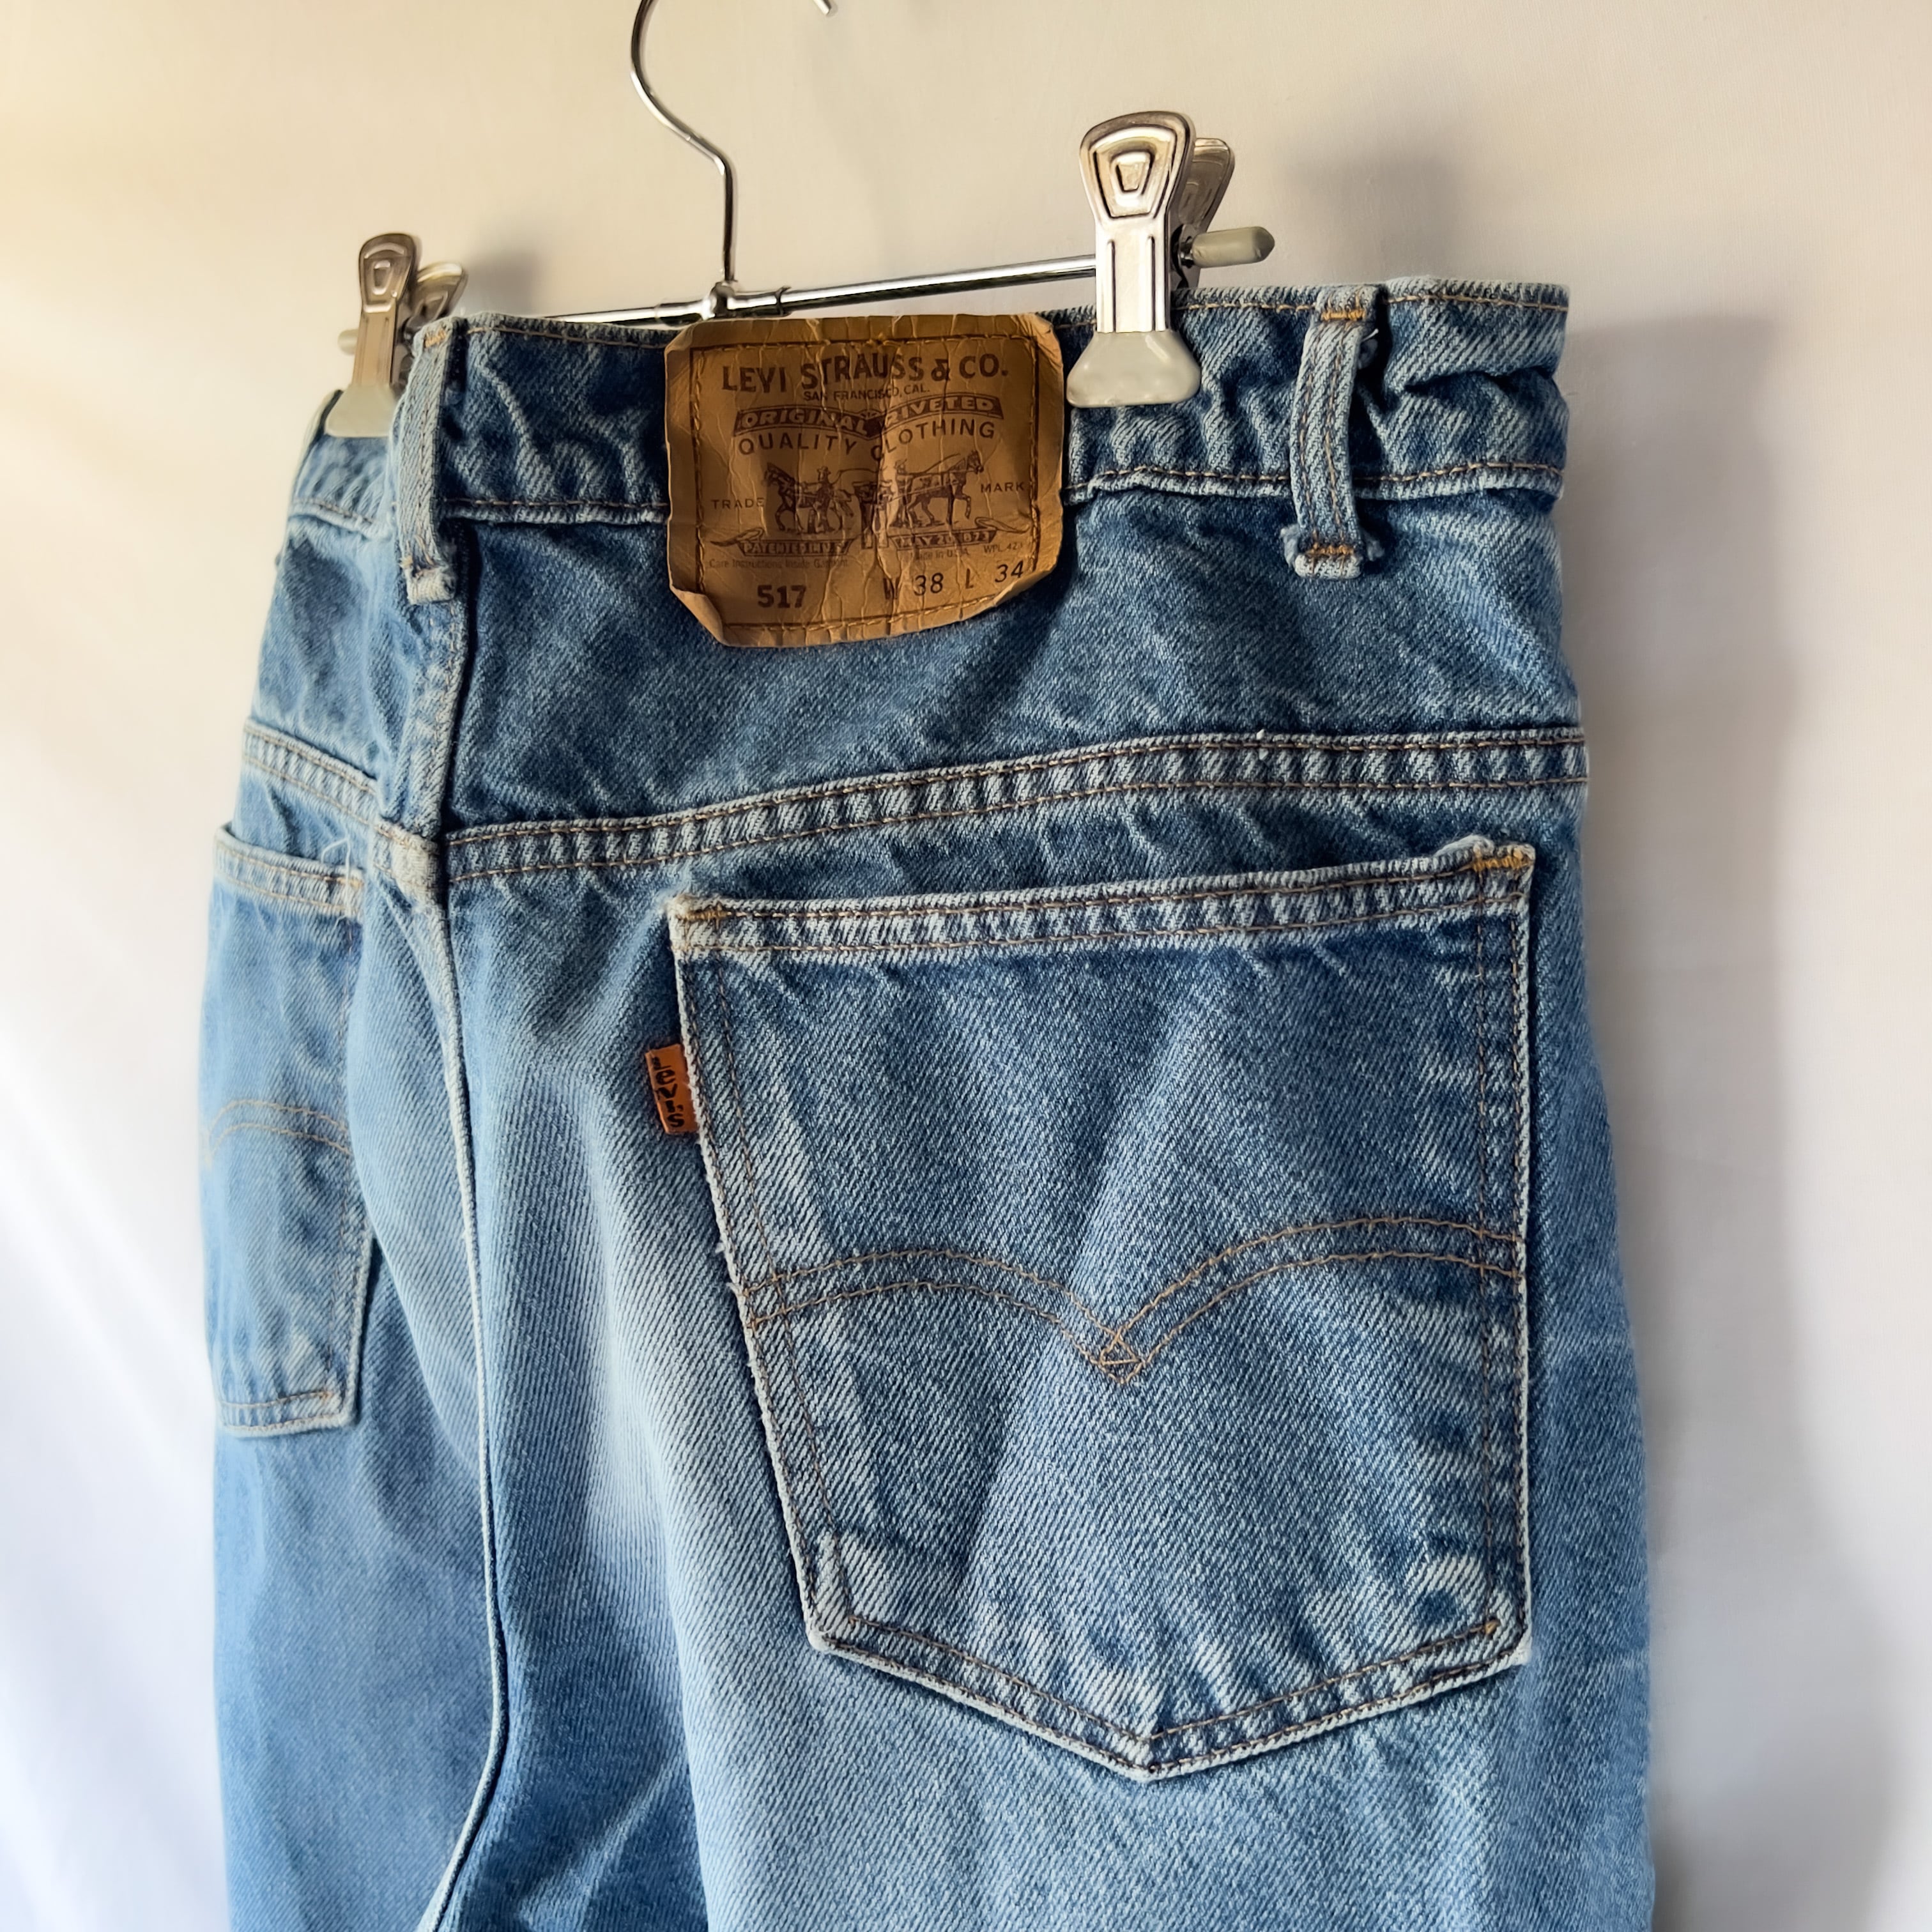 90s “Levi's 517” made in usa ボタン裏864 オレンジタブ 93年1月製造